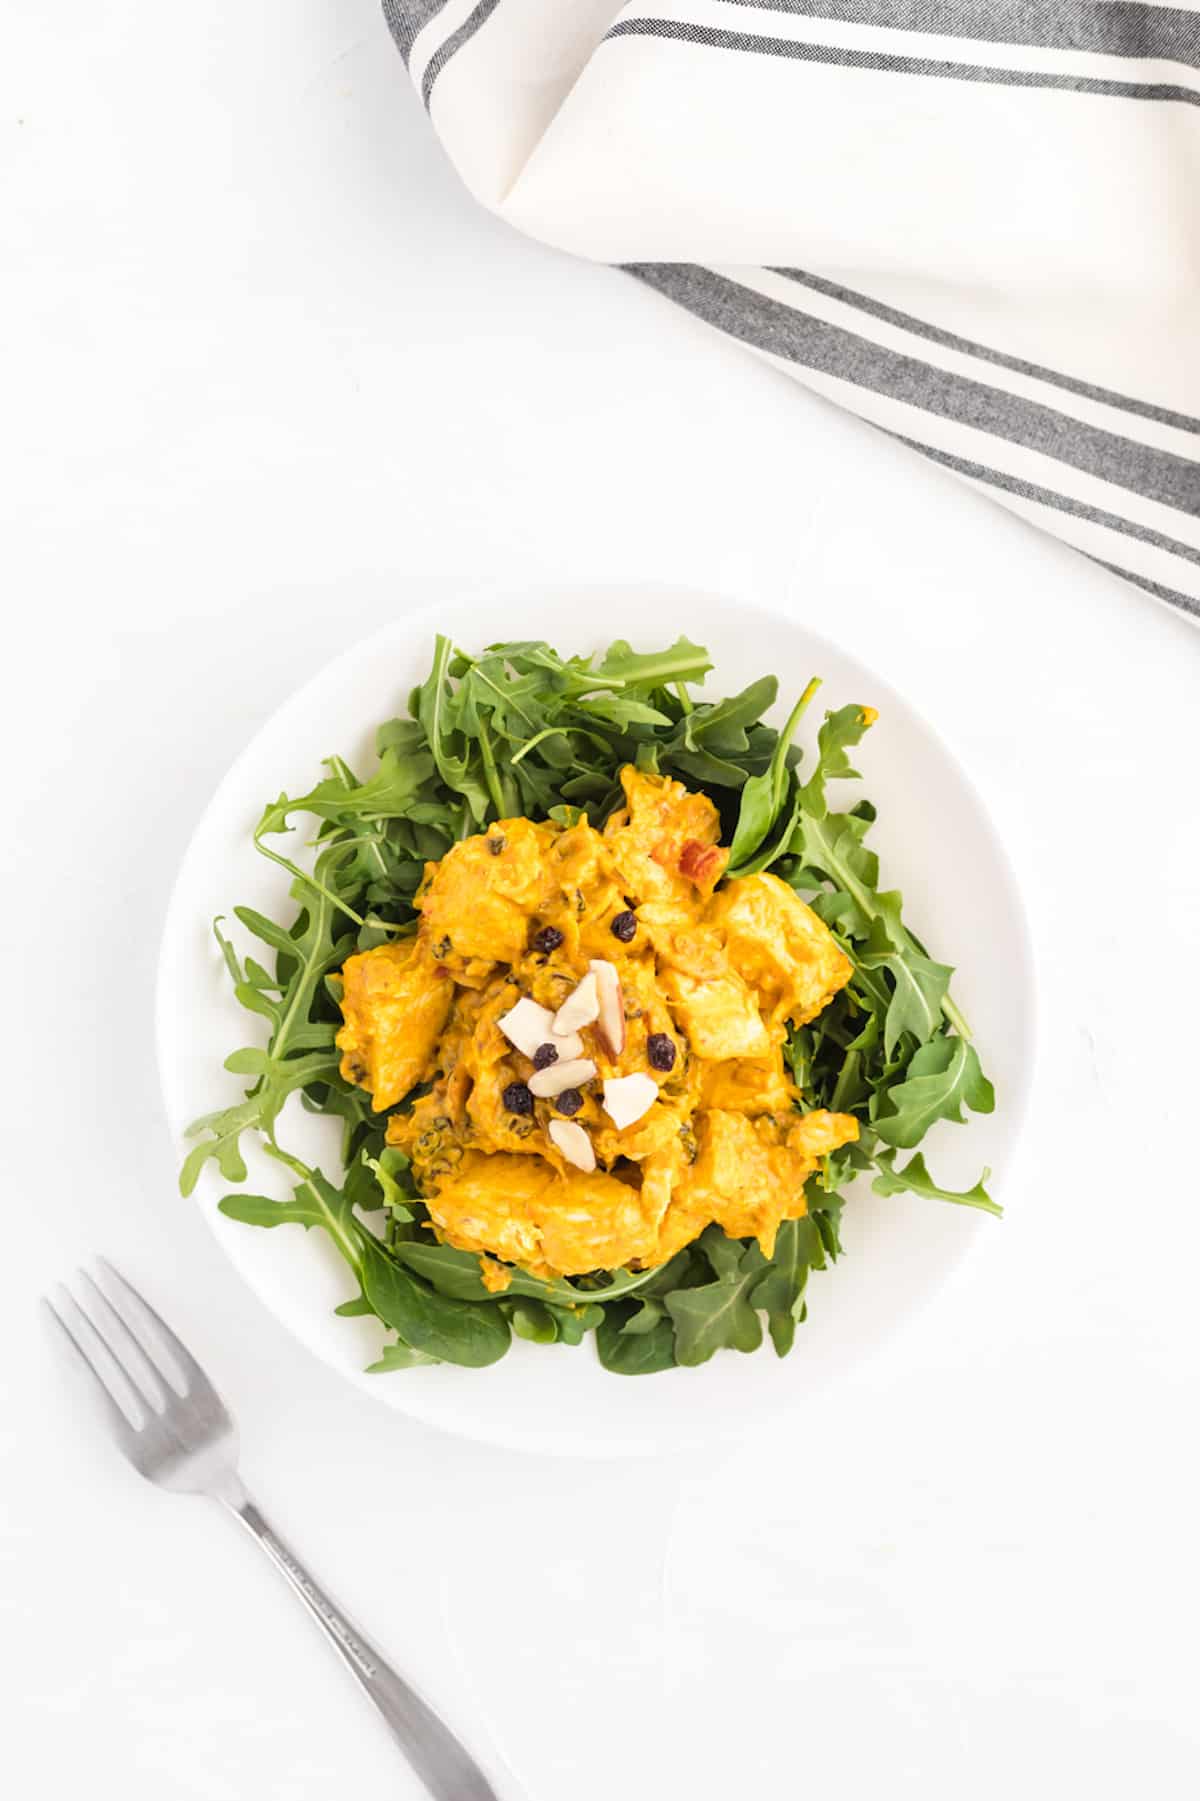 A plate of curry chicken salad on arugula